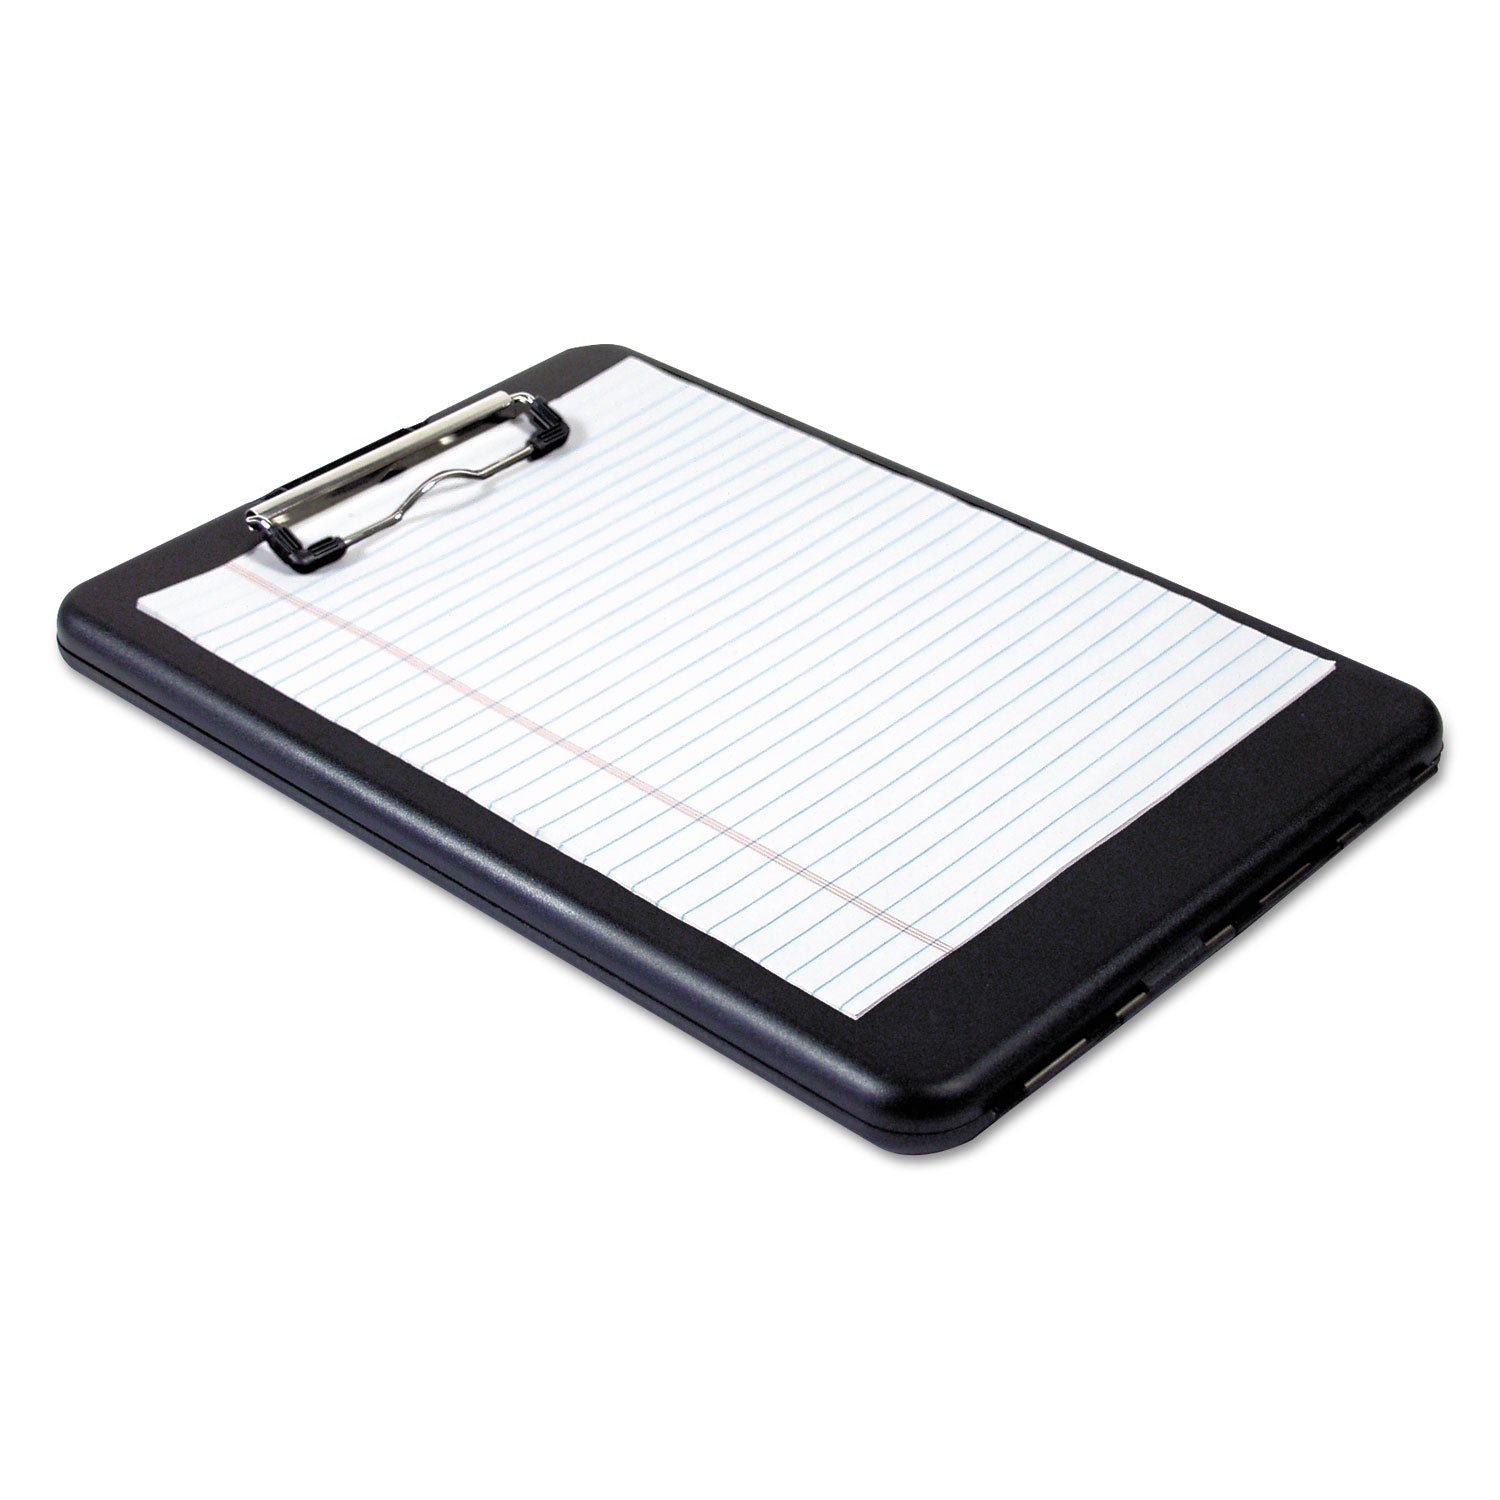 SlimMate Storage Clipboard, 0.5" Clip Capacity, Holds 8.5 x 11 Sheets, Black - 